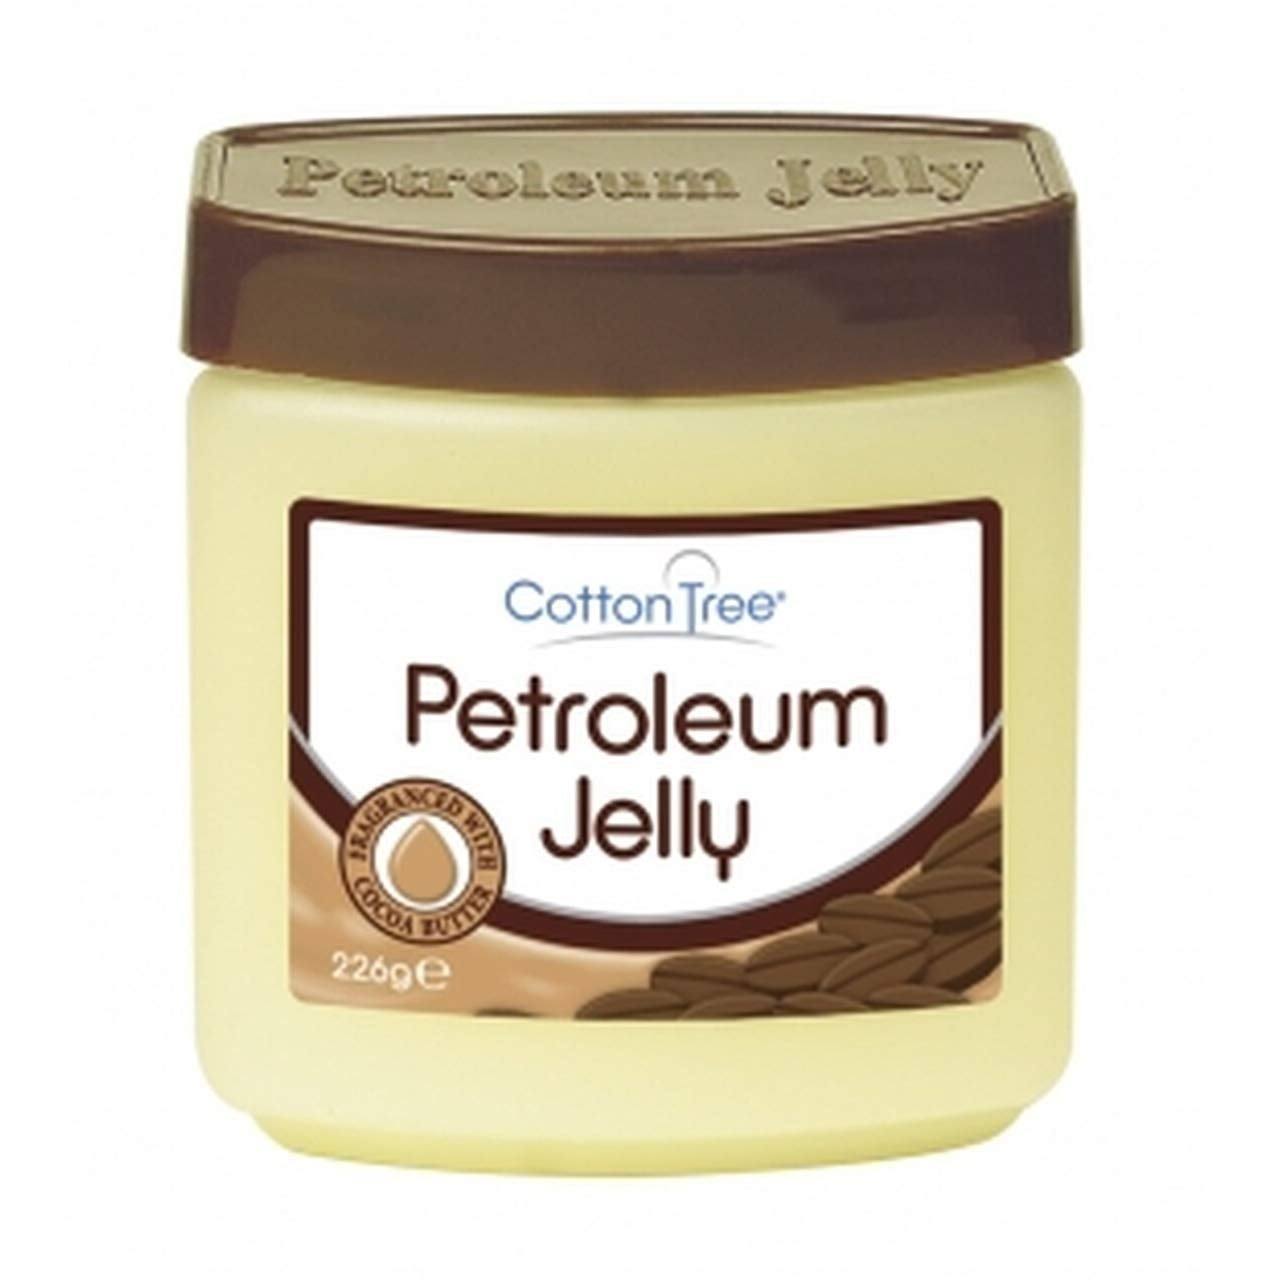 Cotton Tree Petroleum Jelly Fragranced with Cocoa Butter, 226 G PJC226